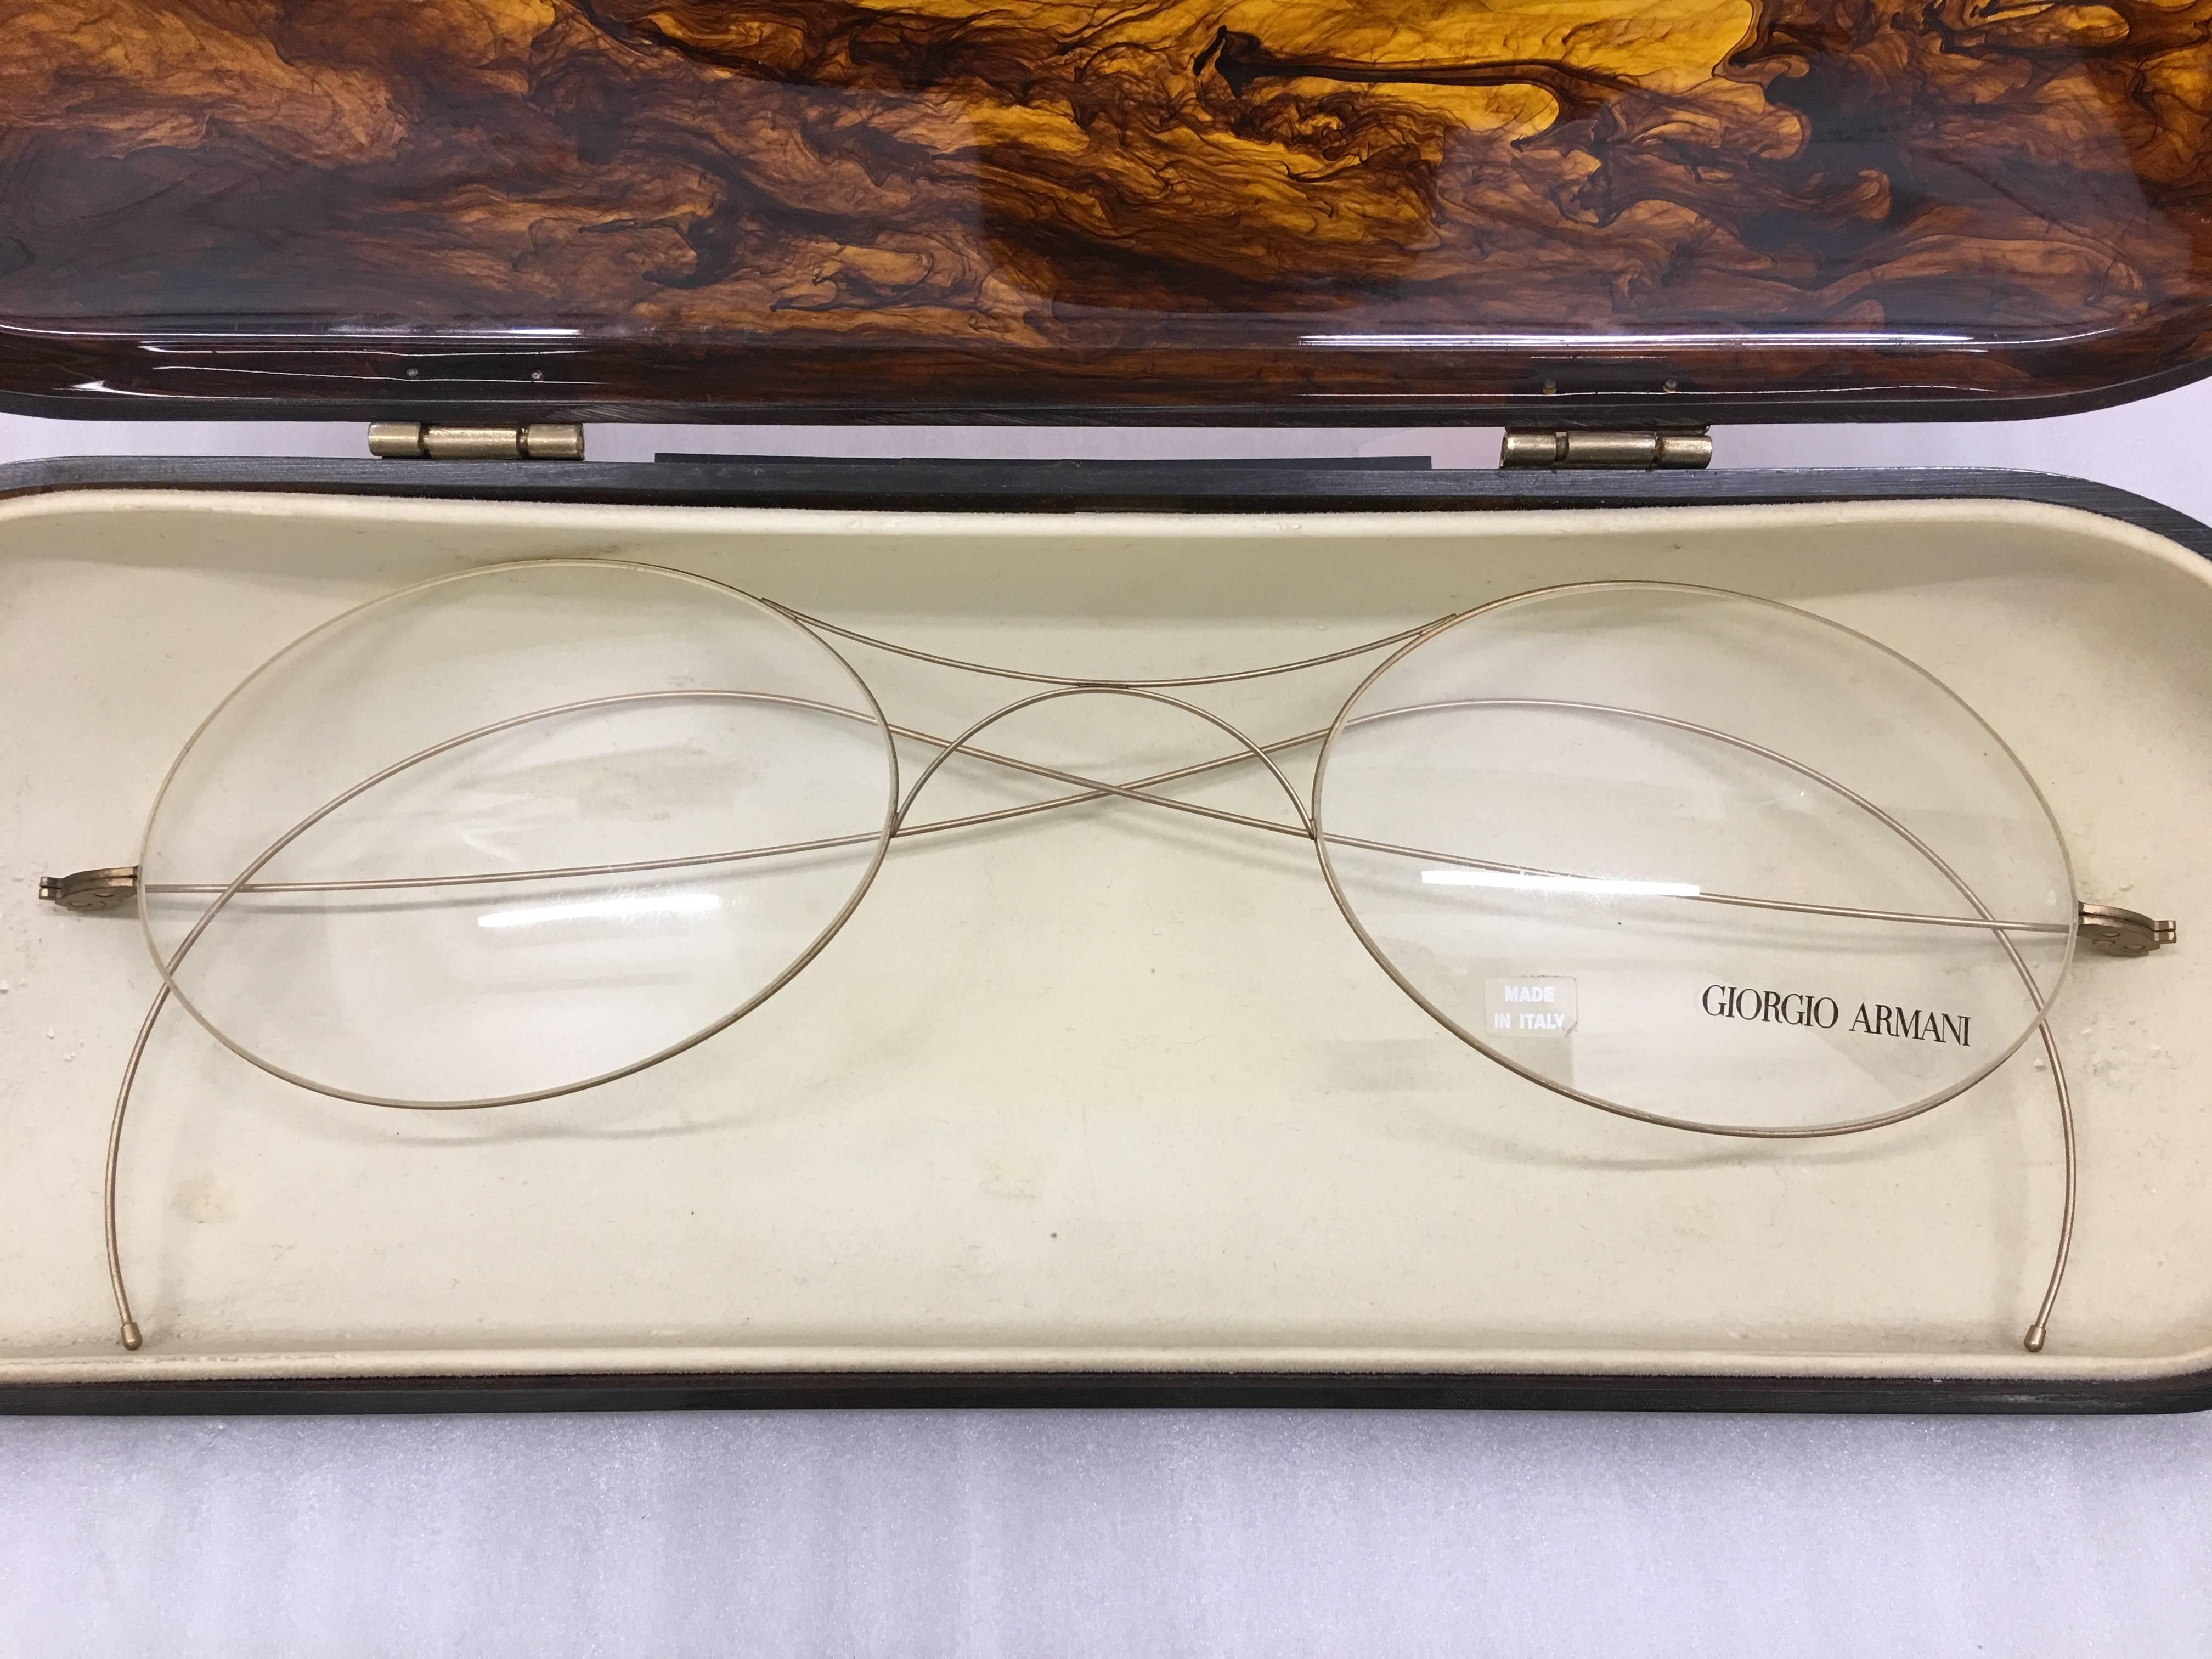 Here is the fabulous Armani glass display that you have always been searching for! This incredible shop display contains both the glasses and its coordinating tortoise shell case.